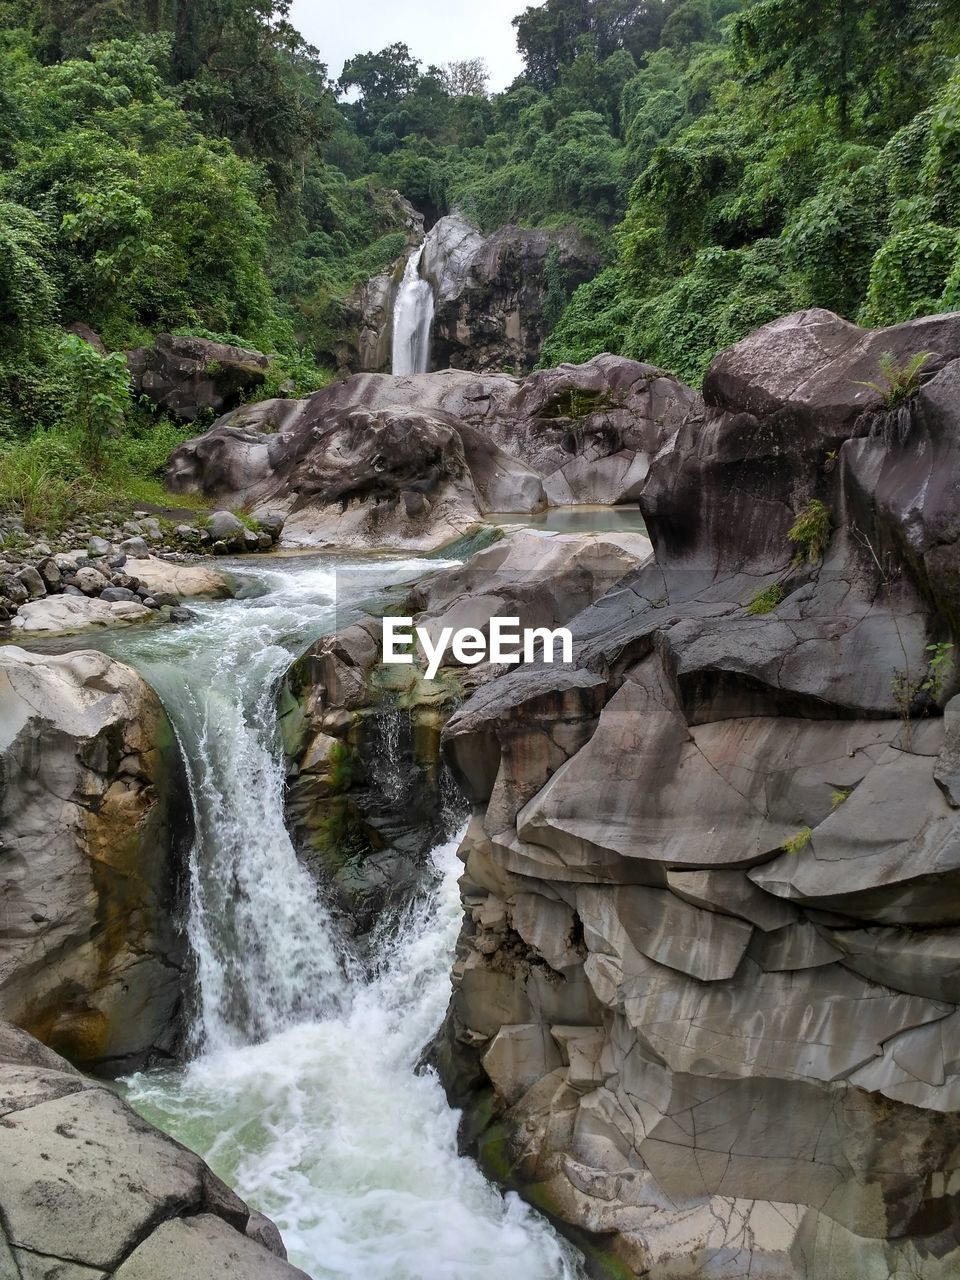 SCENIC VIEW OF WATERFALL IN STREAM